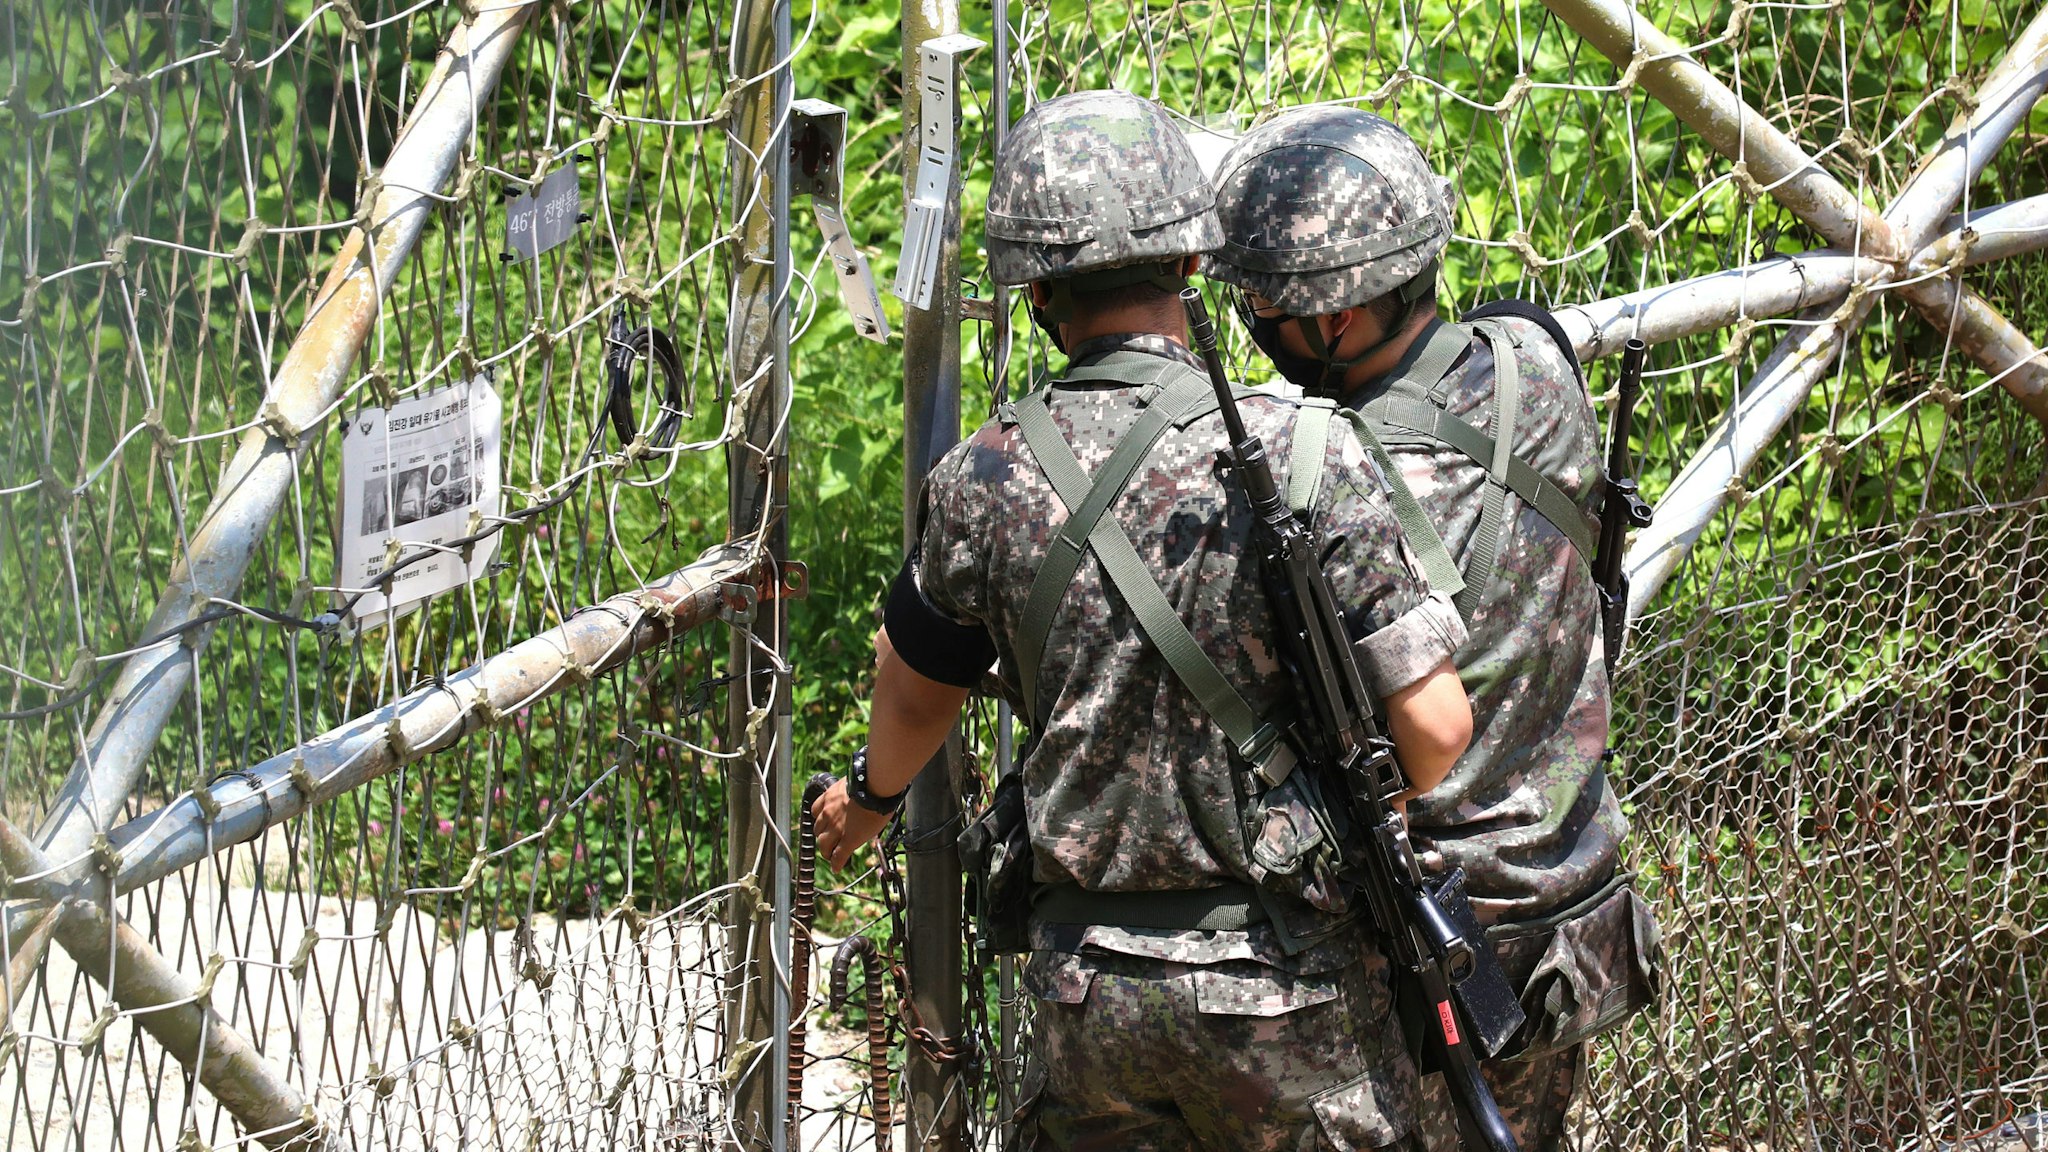 PAJU, SOUTH KOREA - JUNE 16: South Korean soldiers patrol at Imjingak, near the demilitarized zone (DMZ) on June 16, 2020 in Paju, South Korea. North Korea's military said Tuesday it is reviewing plans to re-enter border areas disarmed under inter-Korean agreements, days after the North threatened to take military action over the sending of leaflets by activists from South Korea.